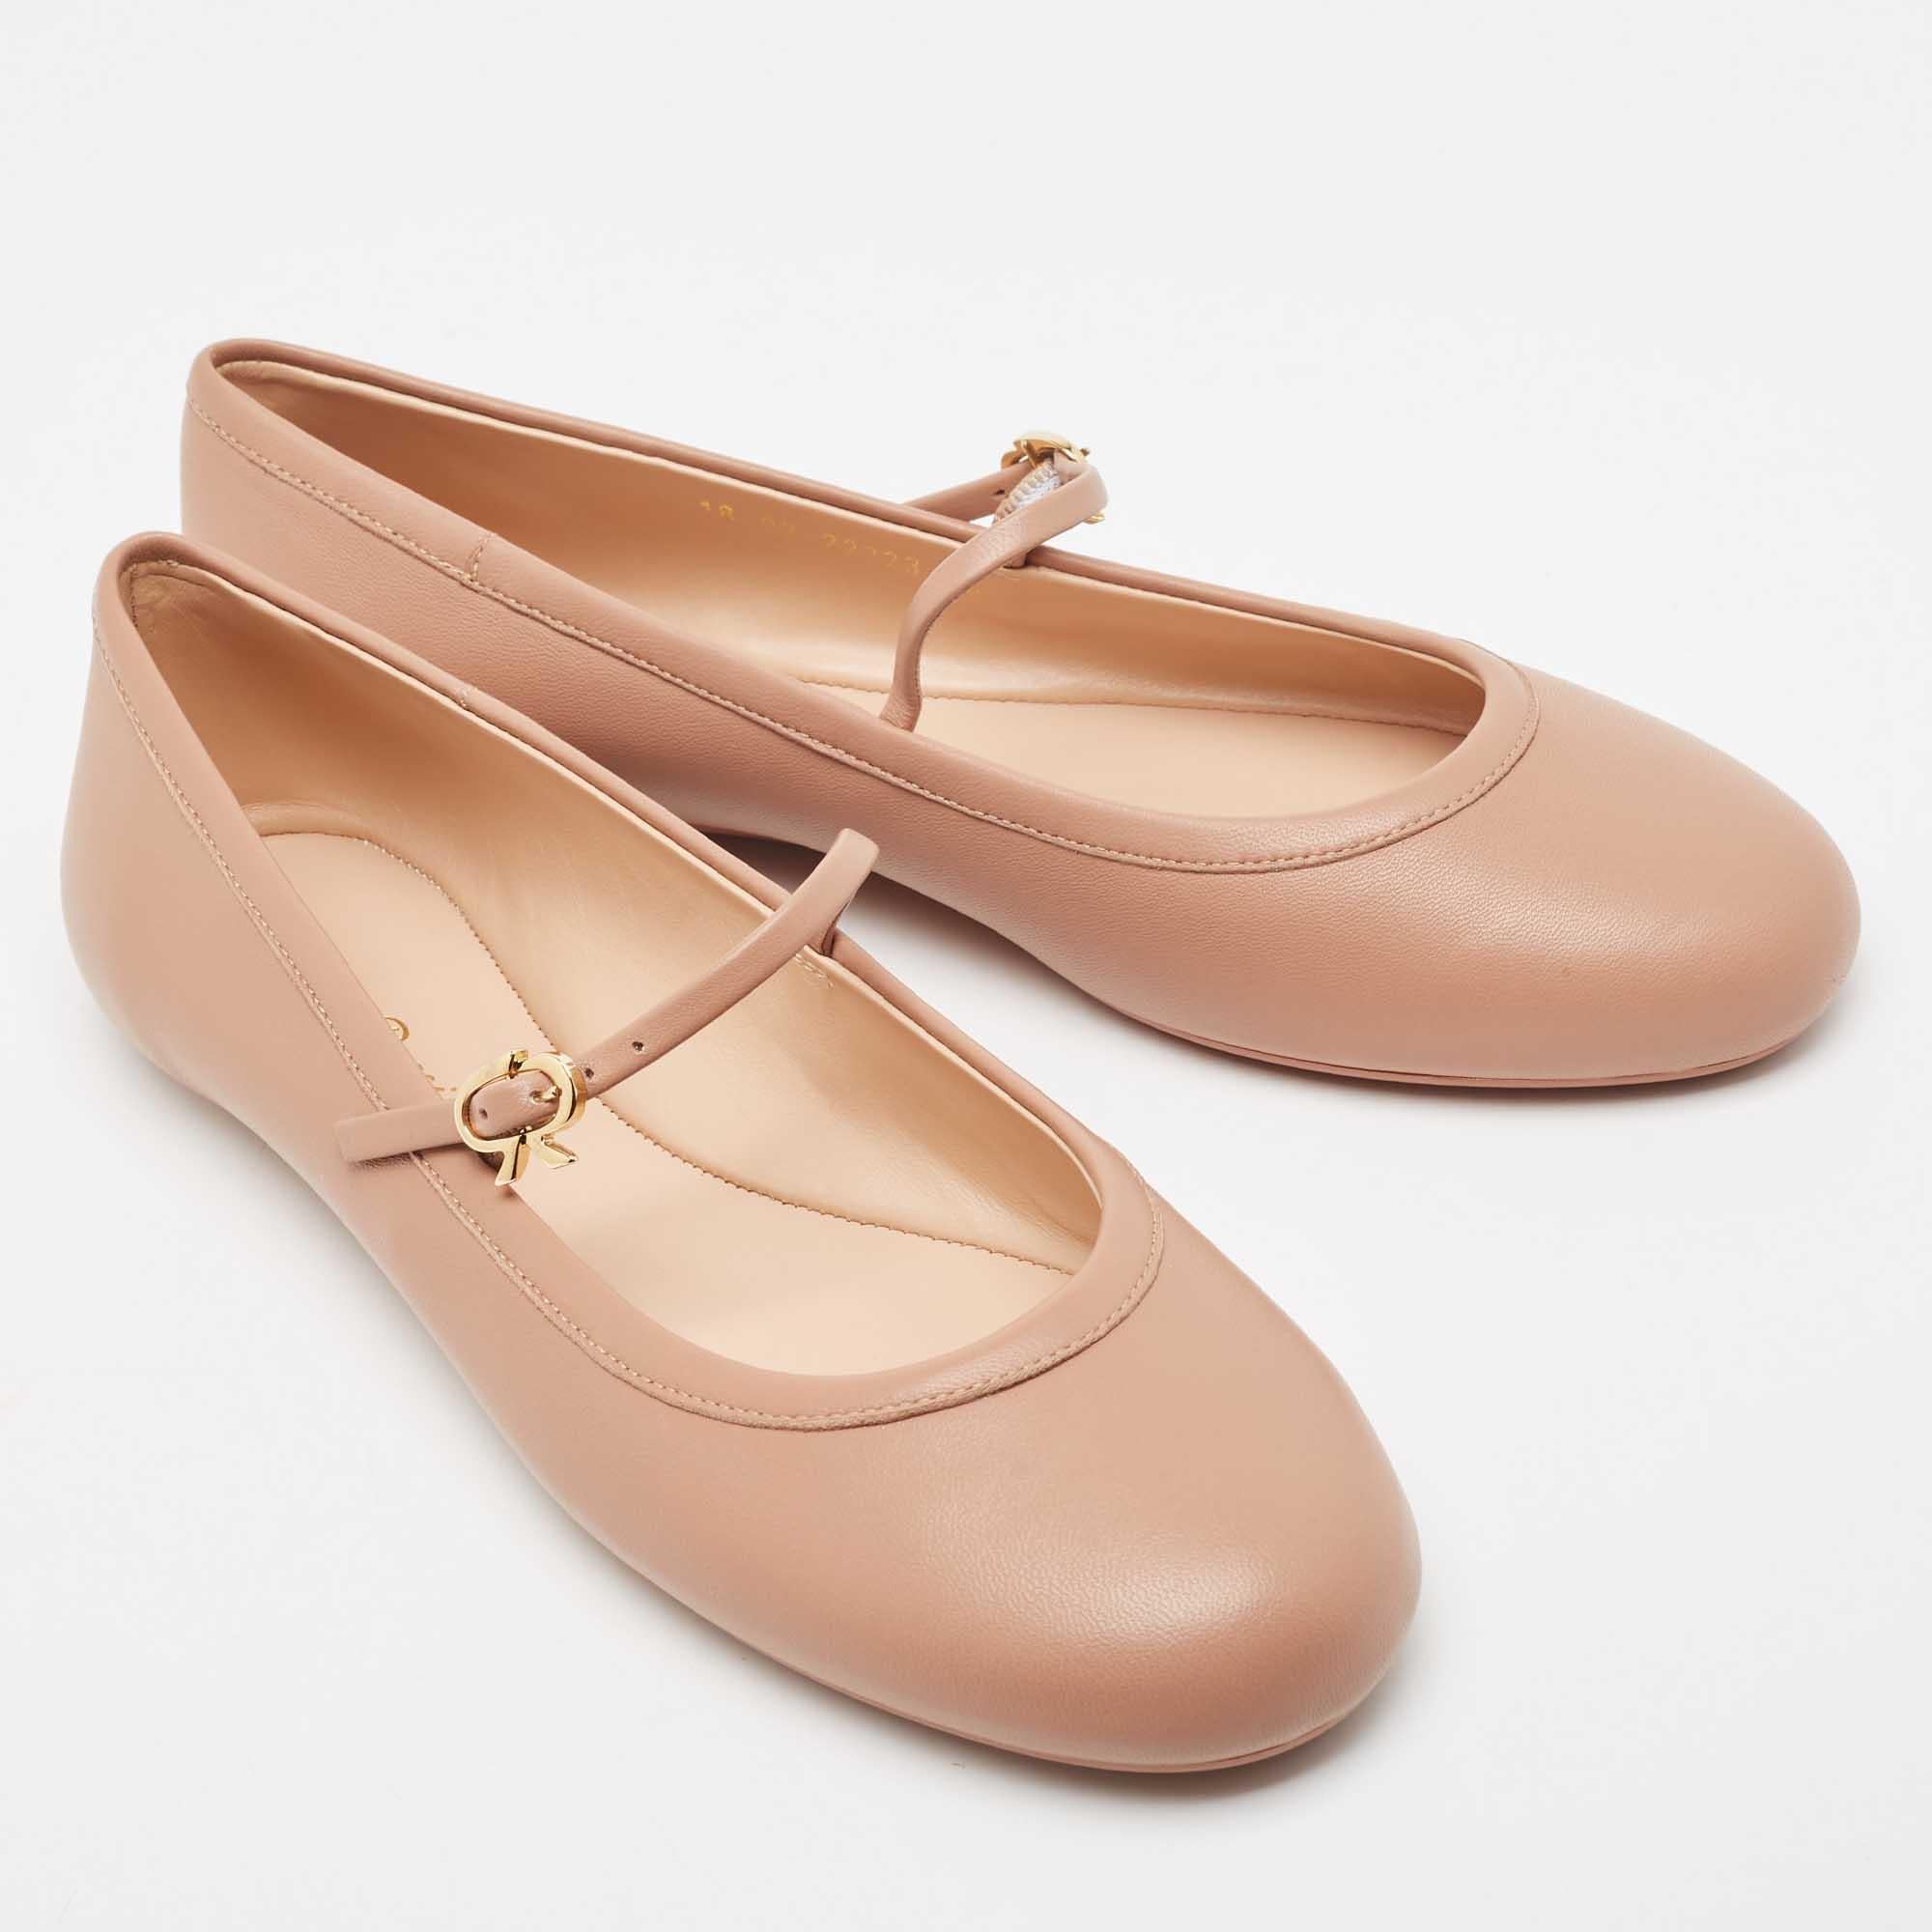 Gianvito Rossi Pink Leather Mary Jane Ballet Flats Size 38 2